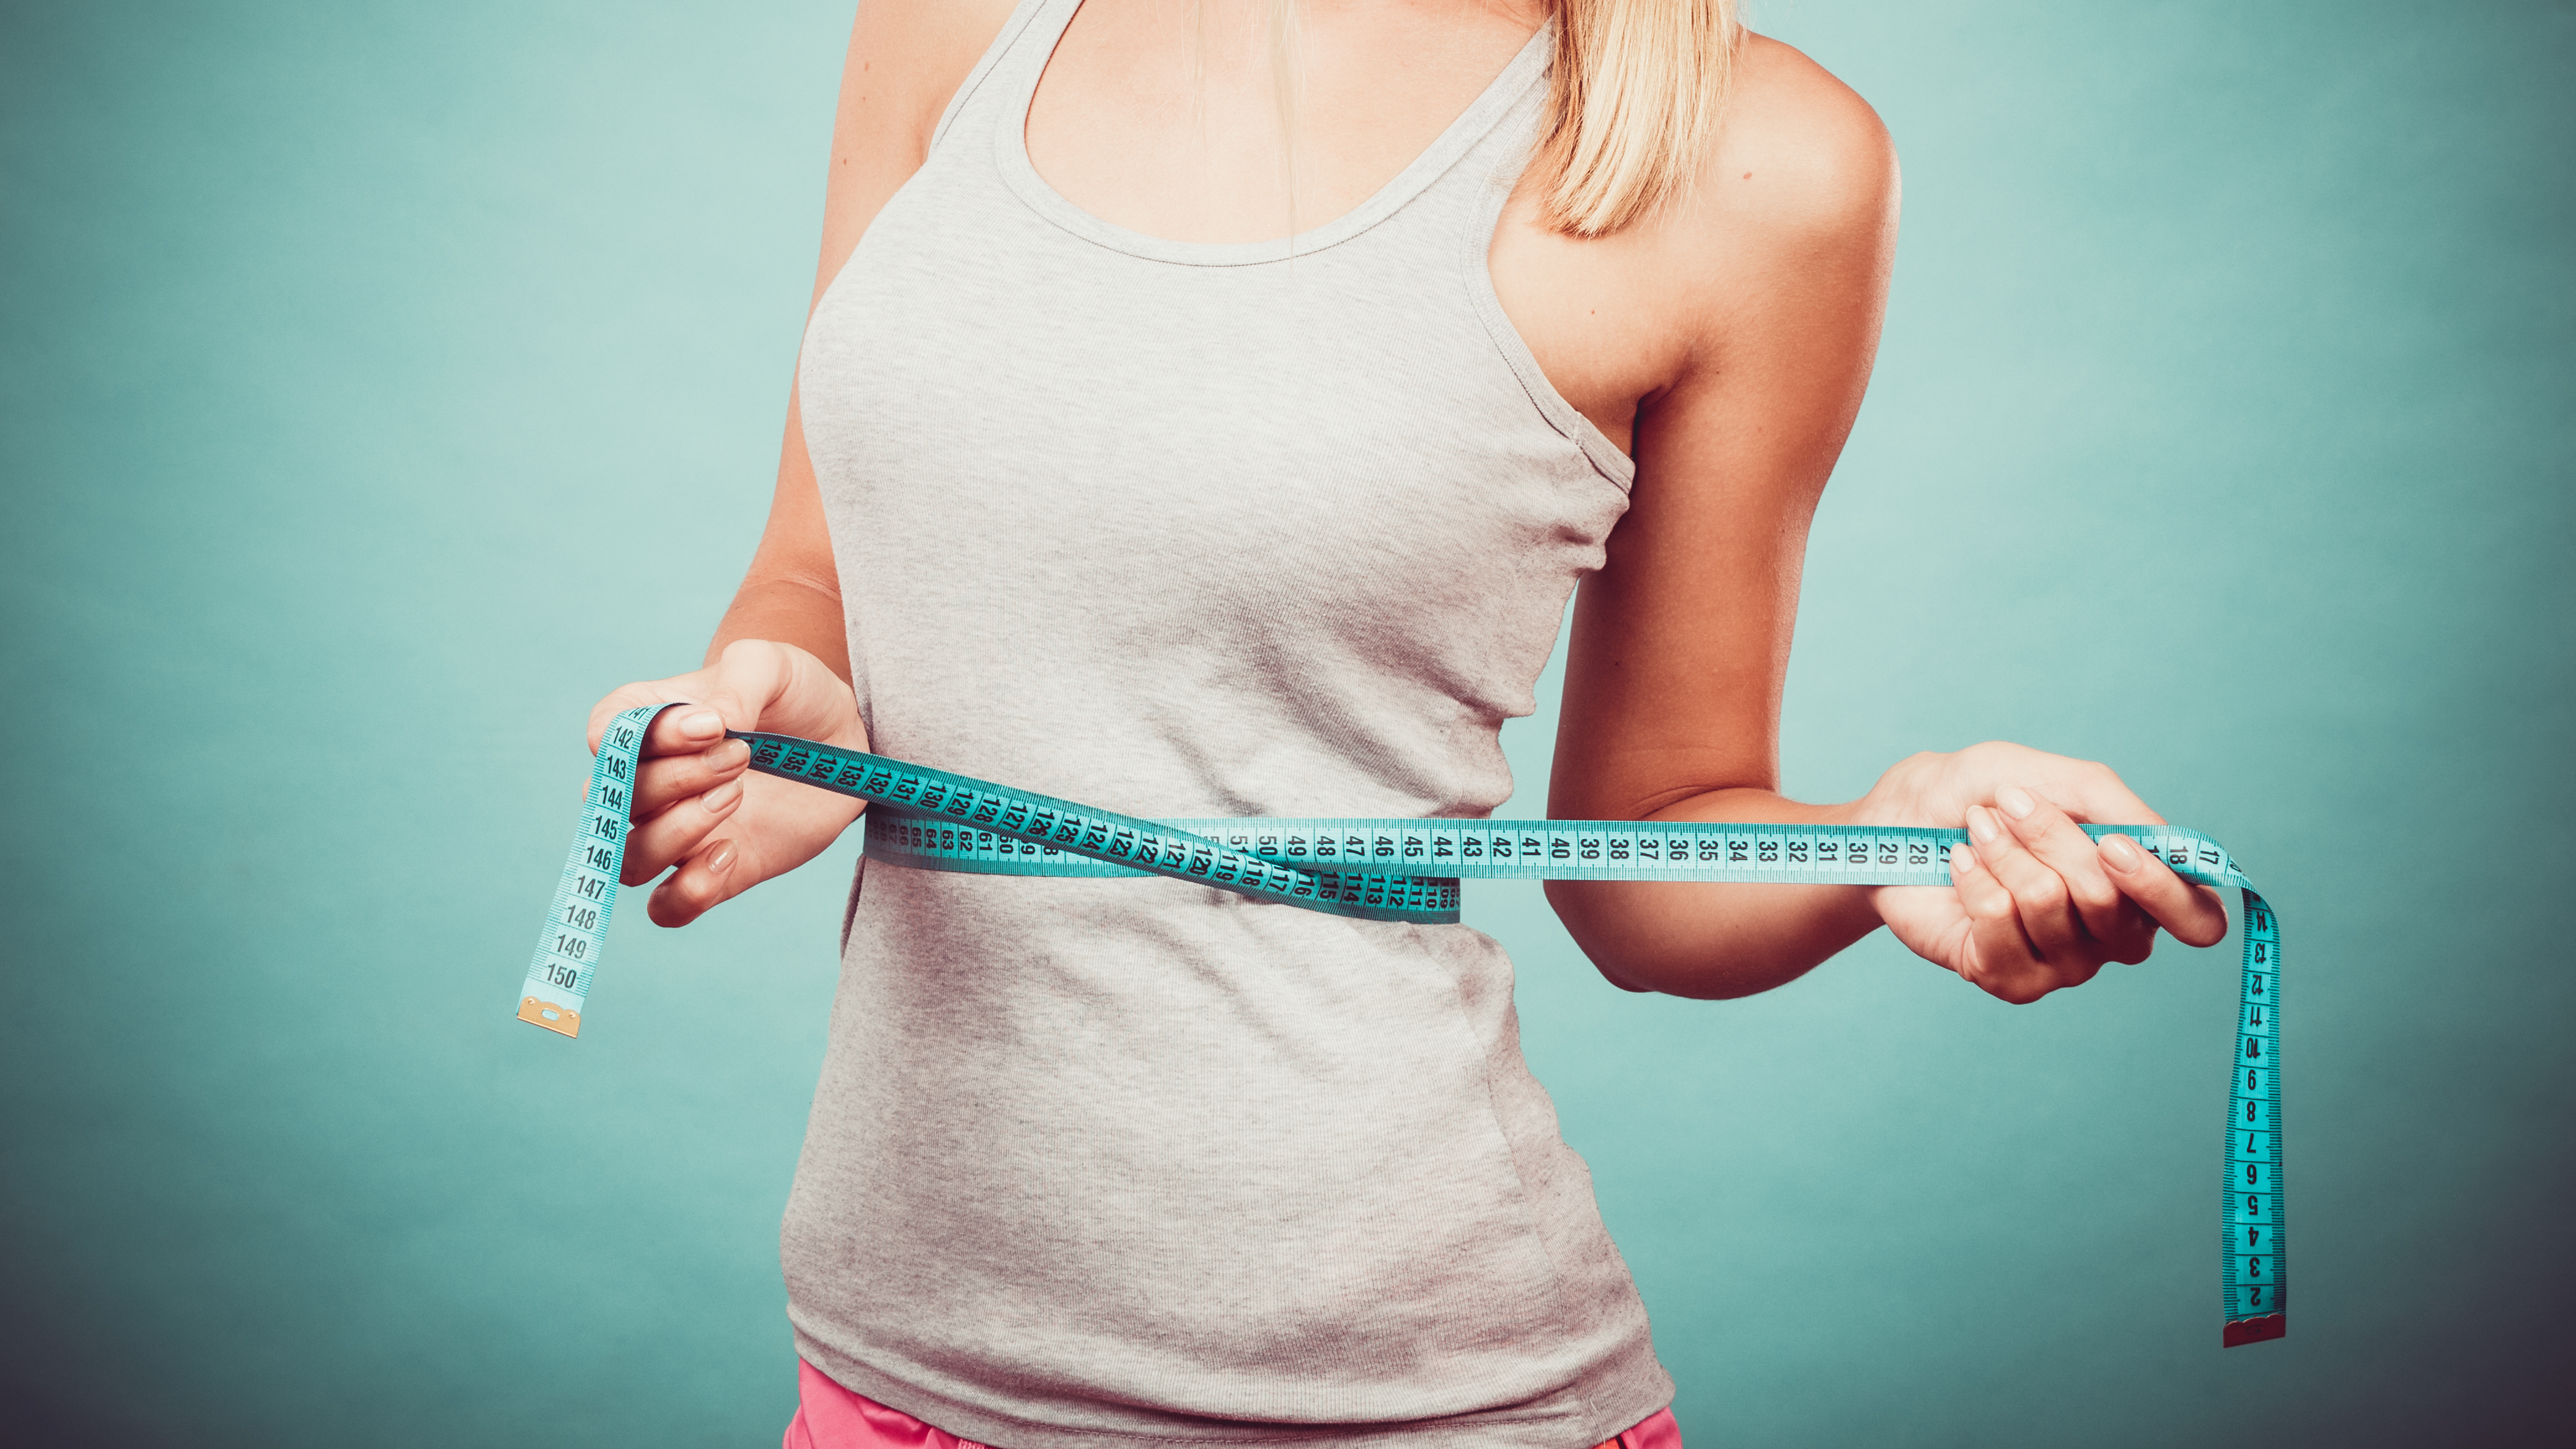 How To Take Your Own Body Measurements Like A Pro